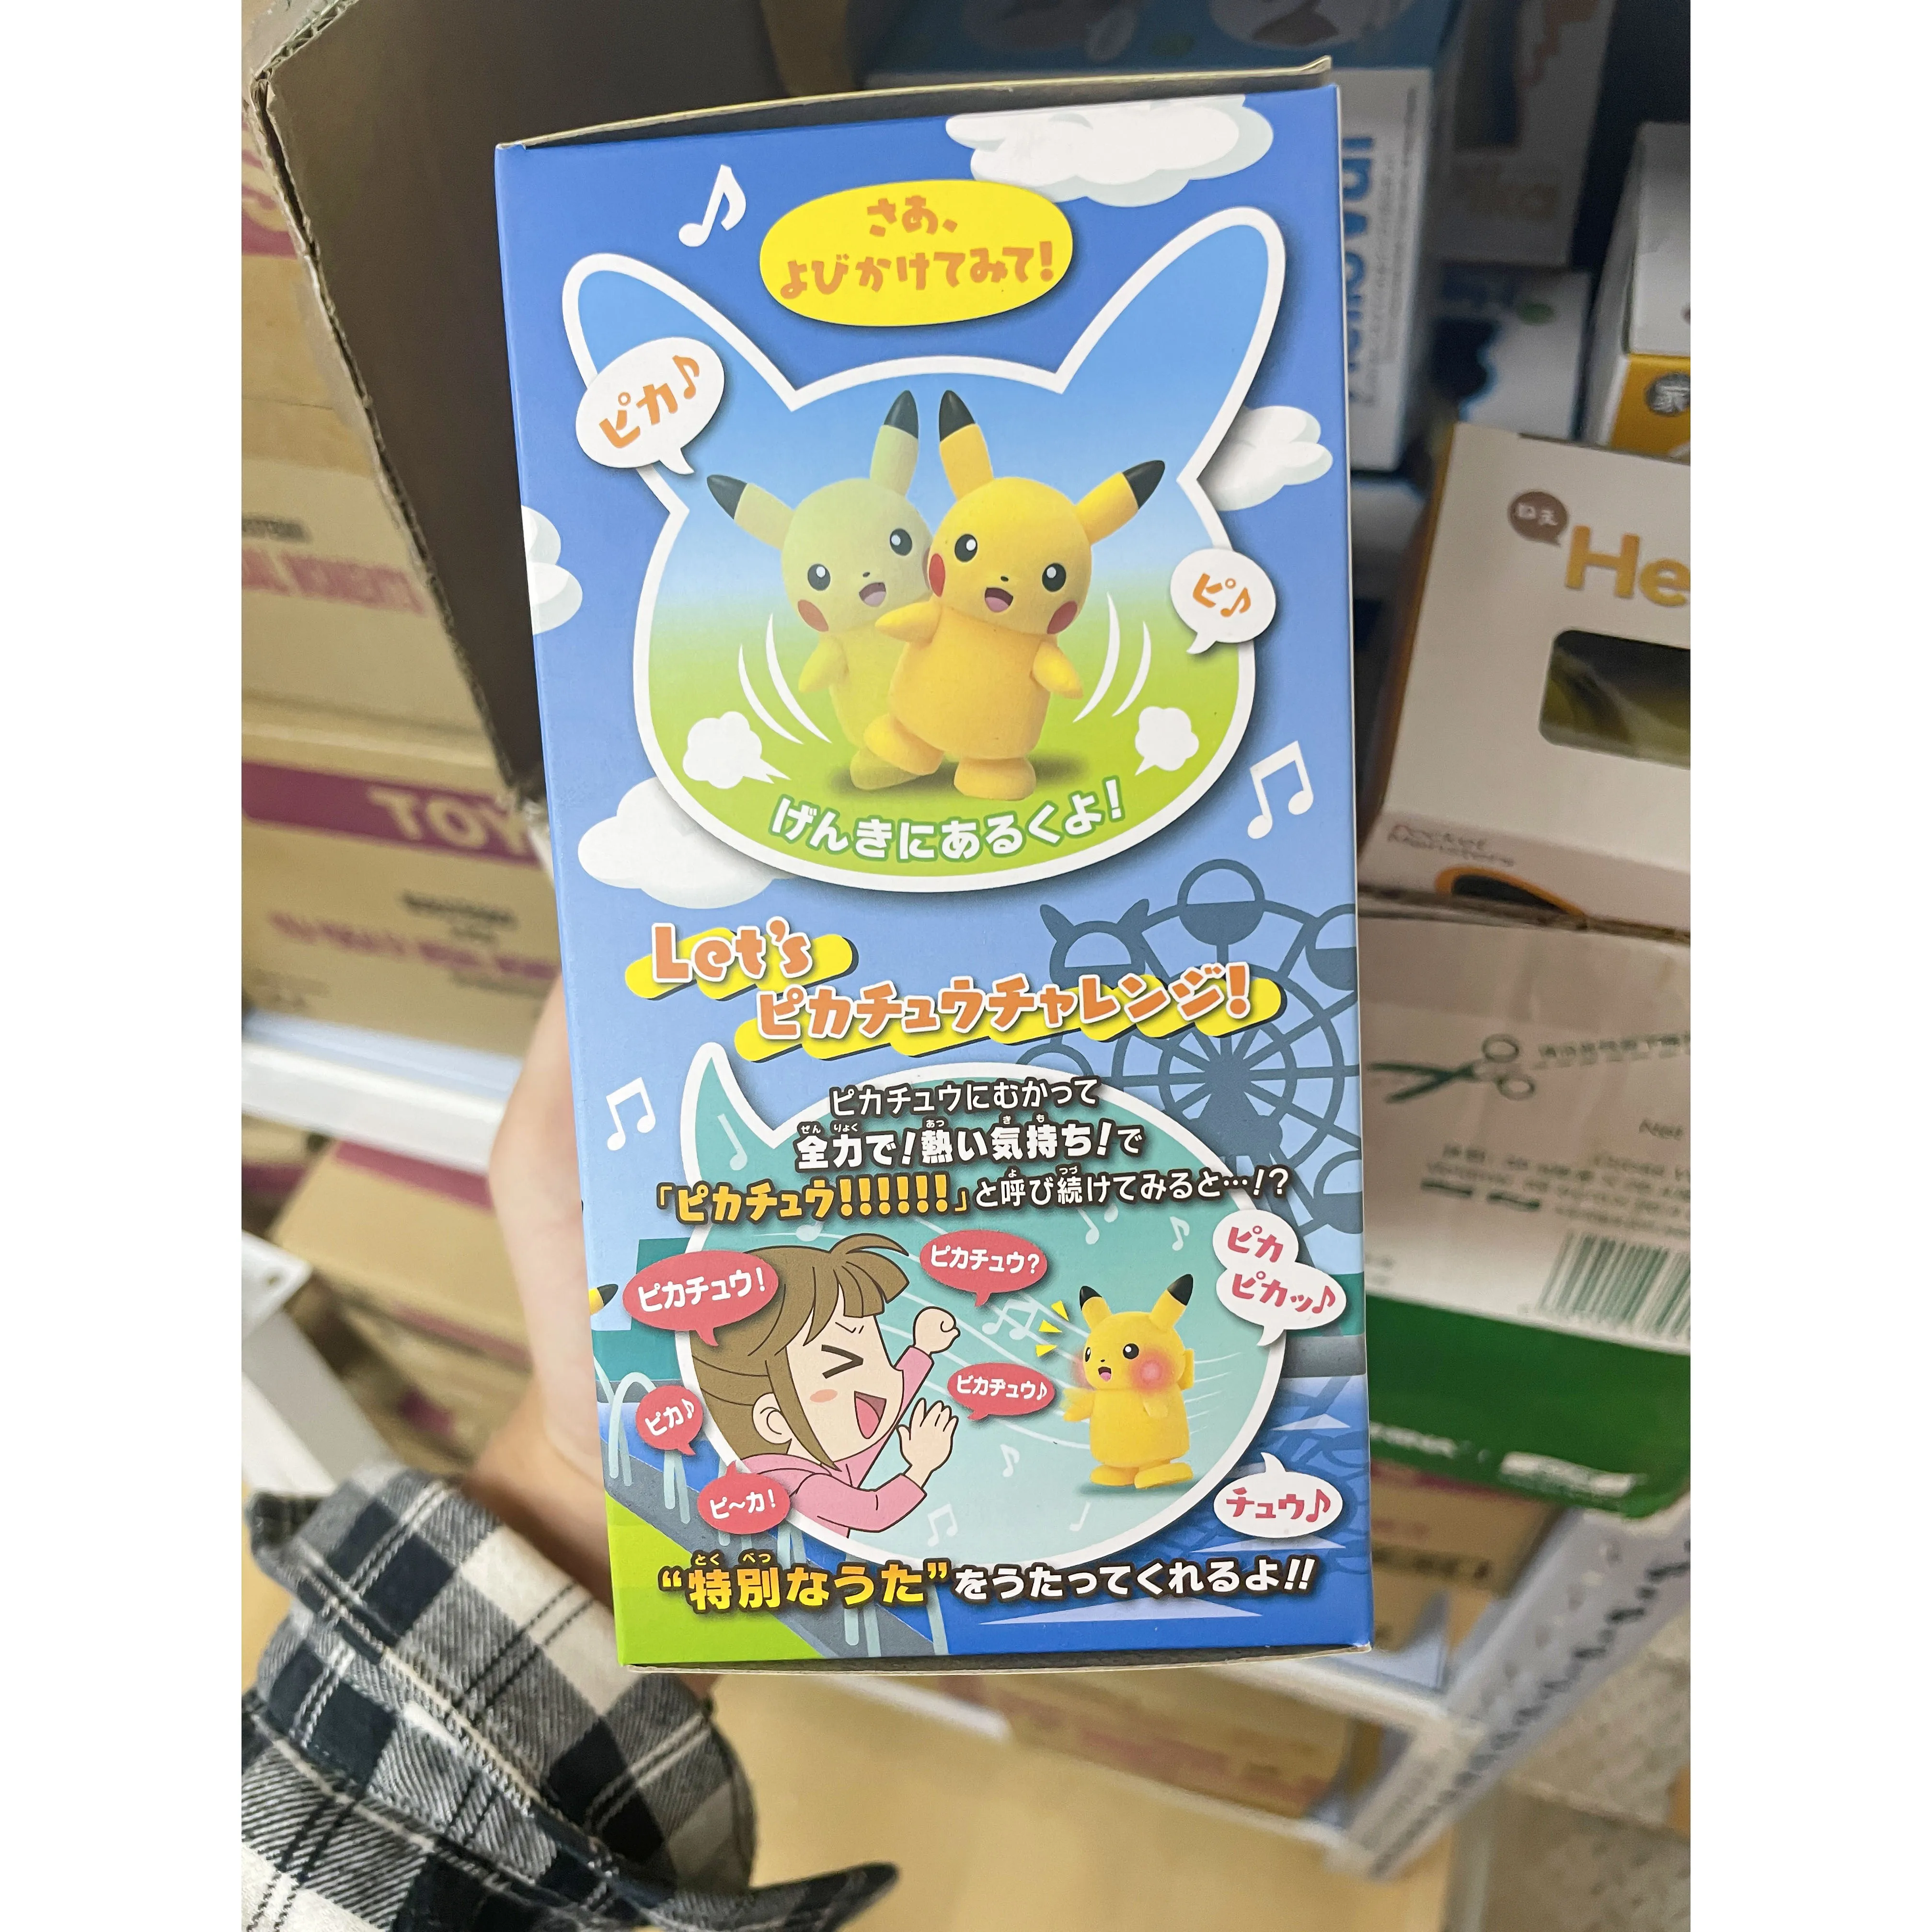 📦 Unboxing: HelloPika, an interactive Pikachu live from Japan